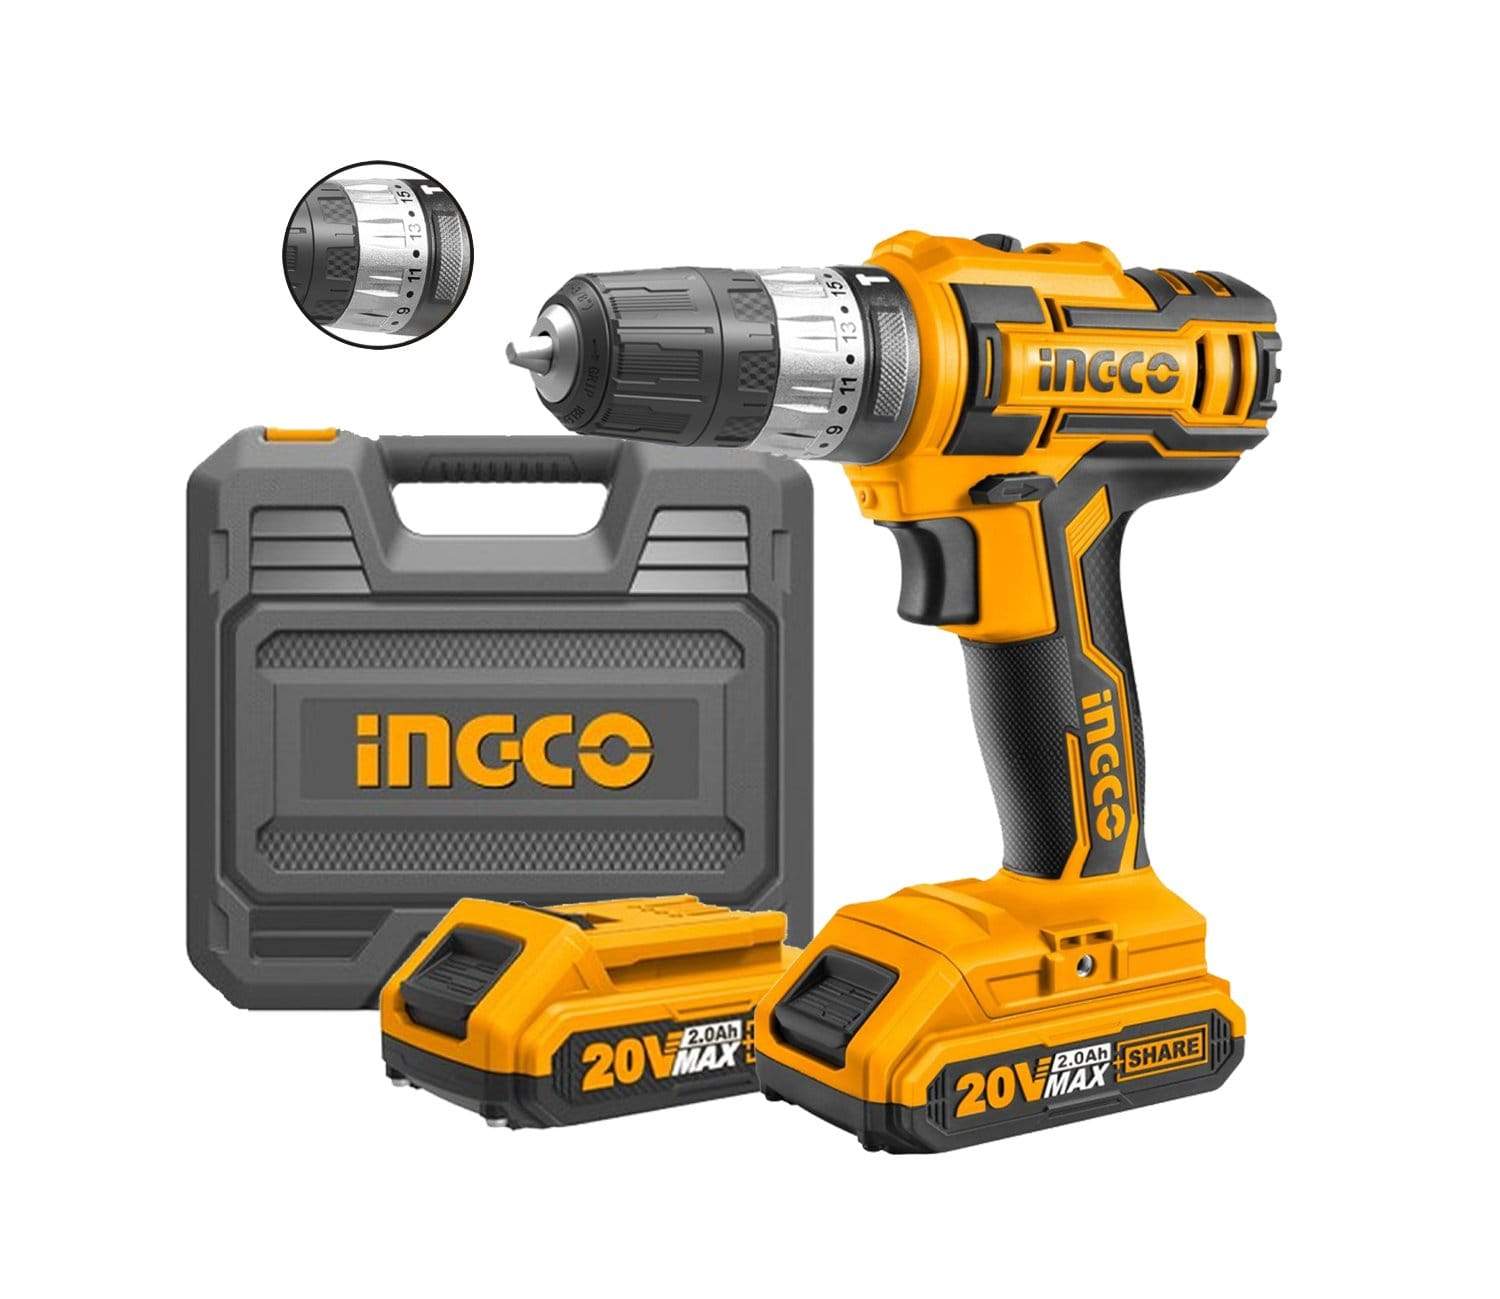 Ingco Lithium-Ion Cordless Hammer Impact Drill with Two 20V Batteries - CIDLI200215 | Supply Master | Accra, Ghana Tools Building Steel Engineering Hardware tool